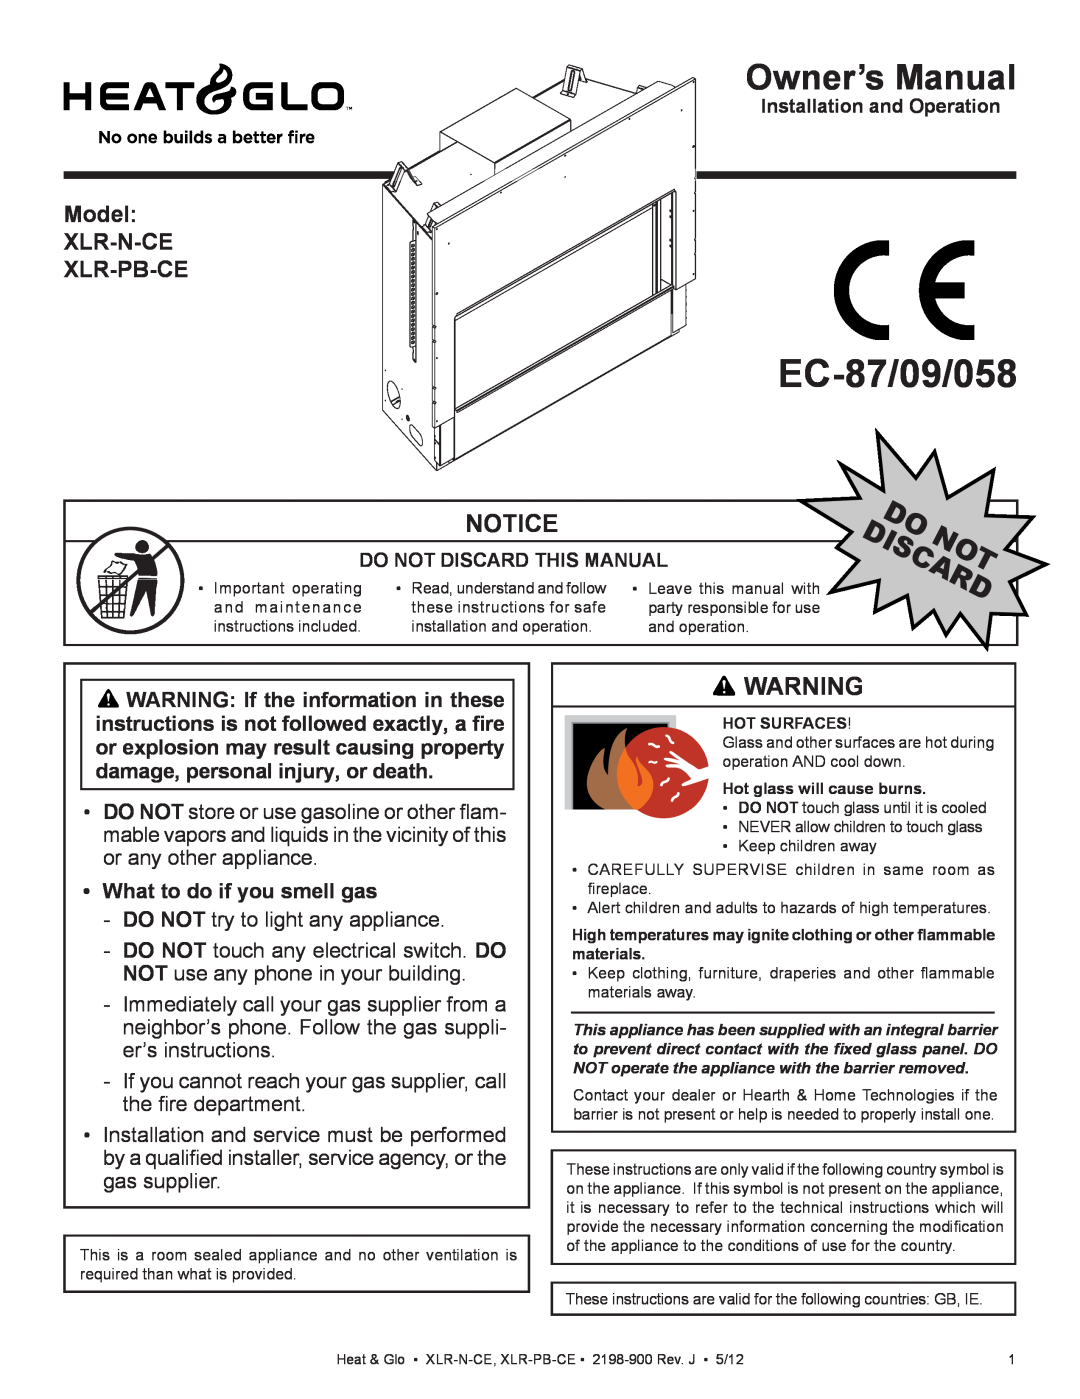 Heat & Glo LifeStyle XLR-PB-CE, XLR-N-CE manual Notice, •What to do if you smell gas, EC-87/09/058, Owner’s Manual 